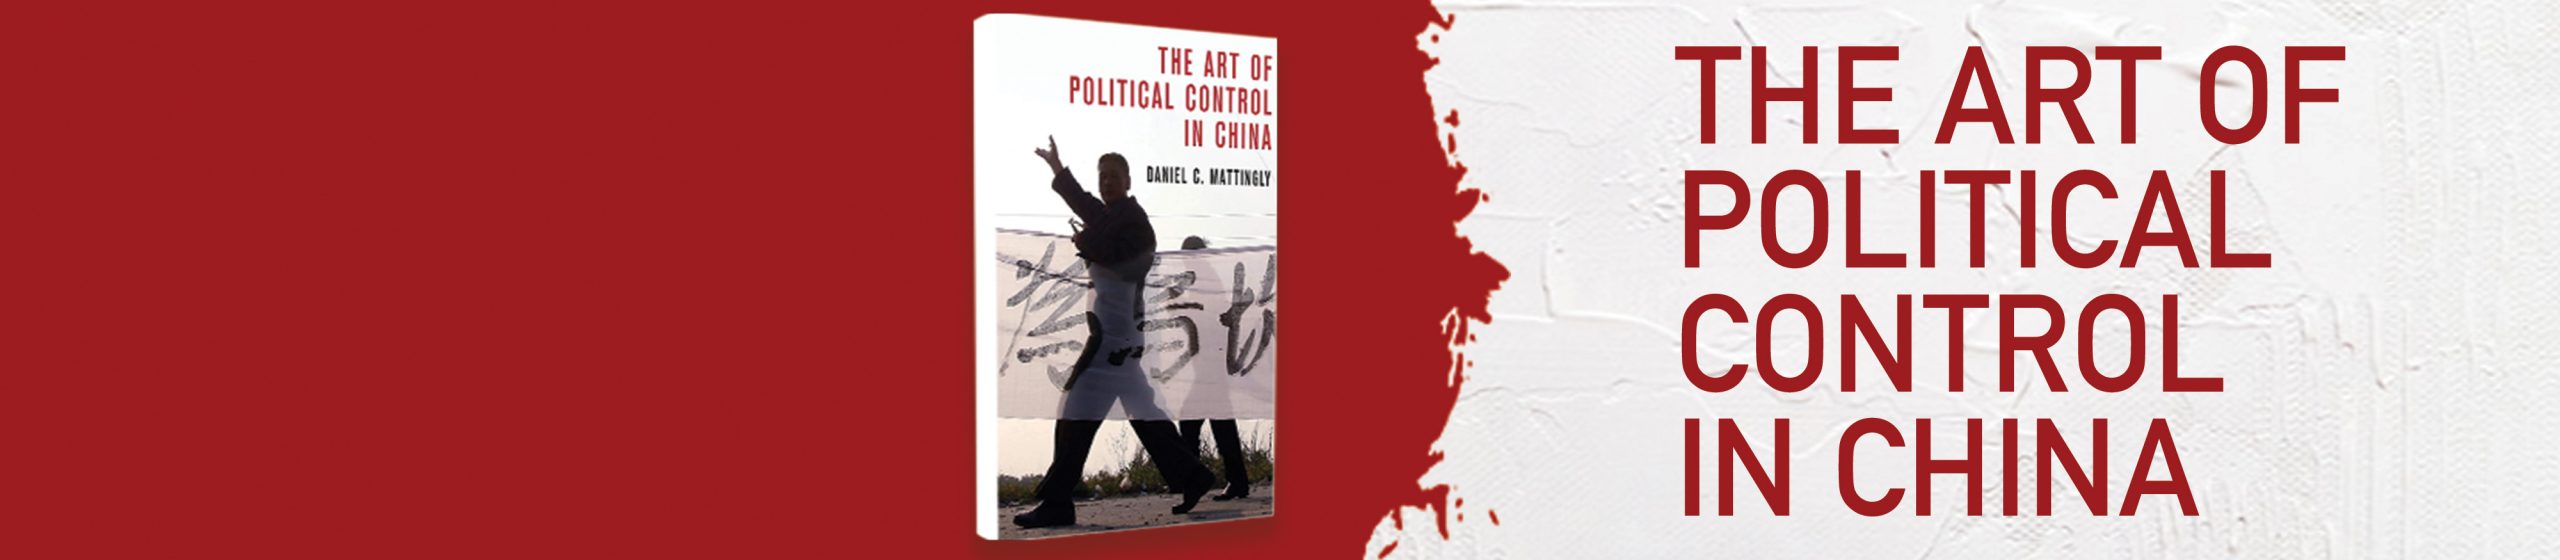 Book Discussion | The Art of Political Control in China